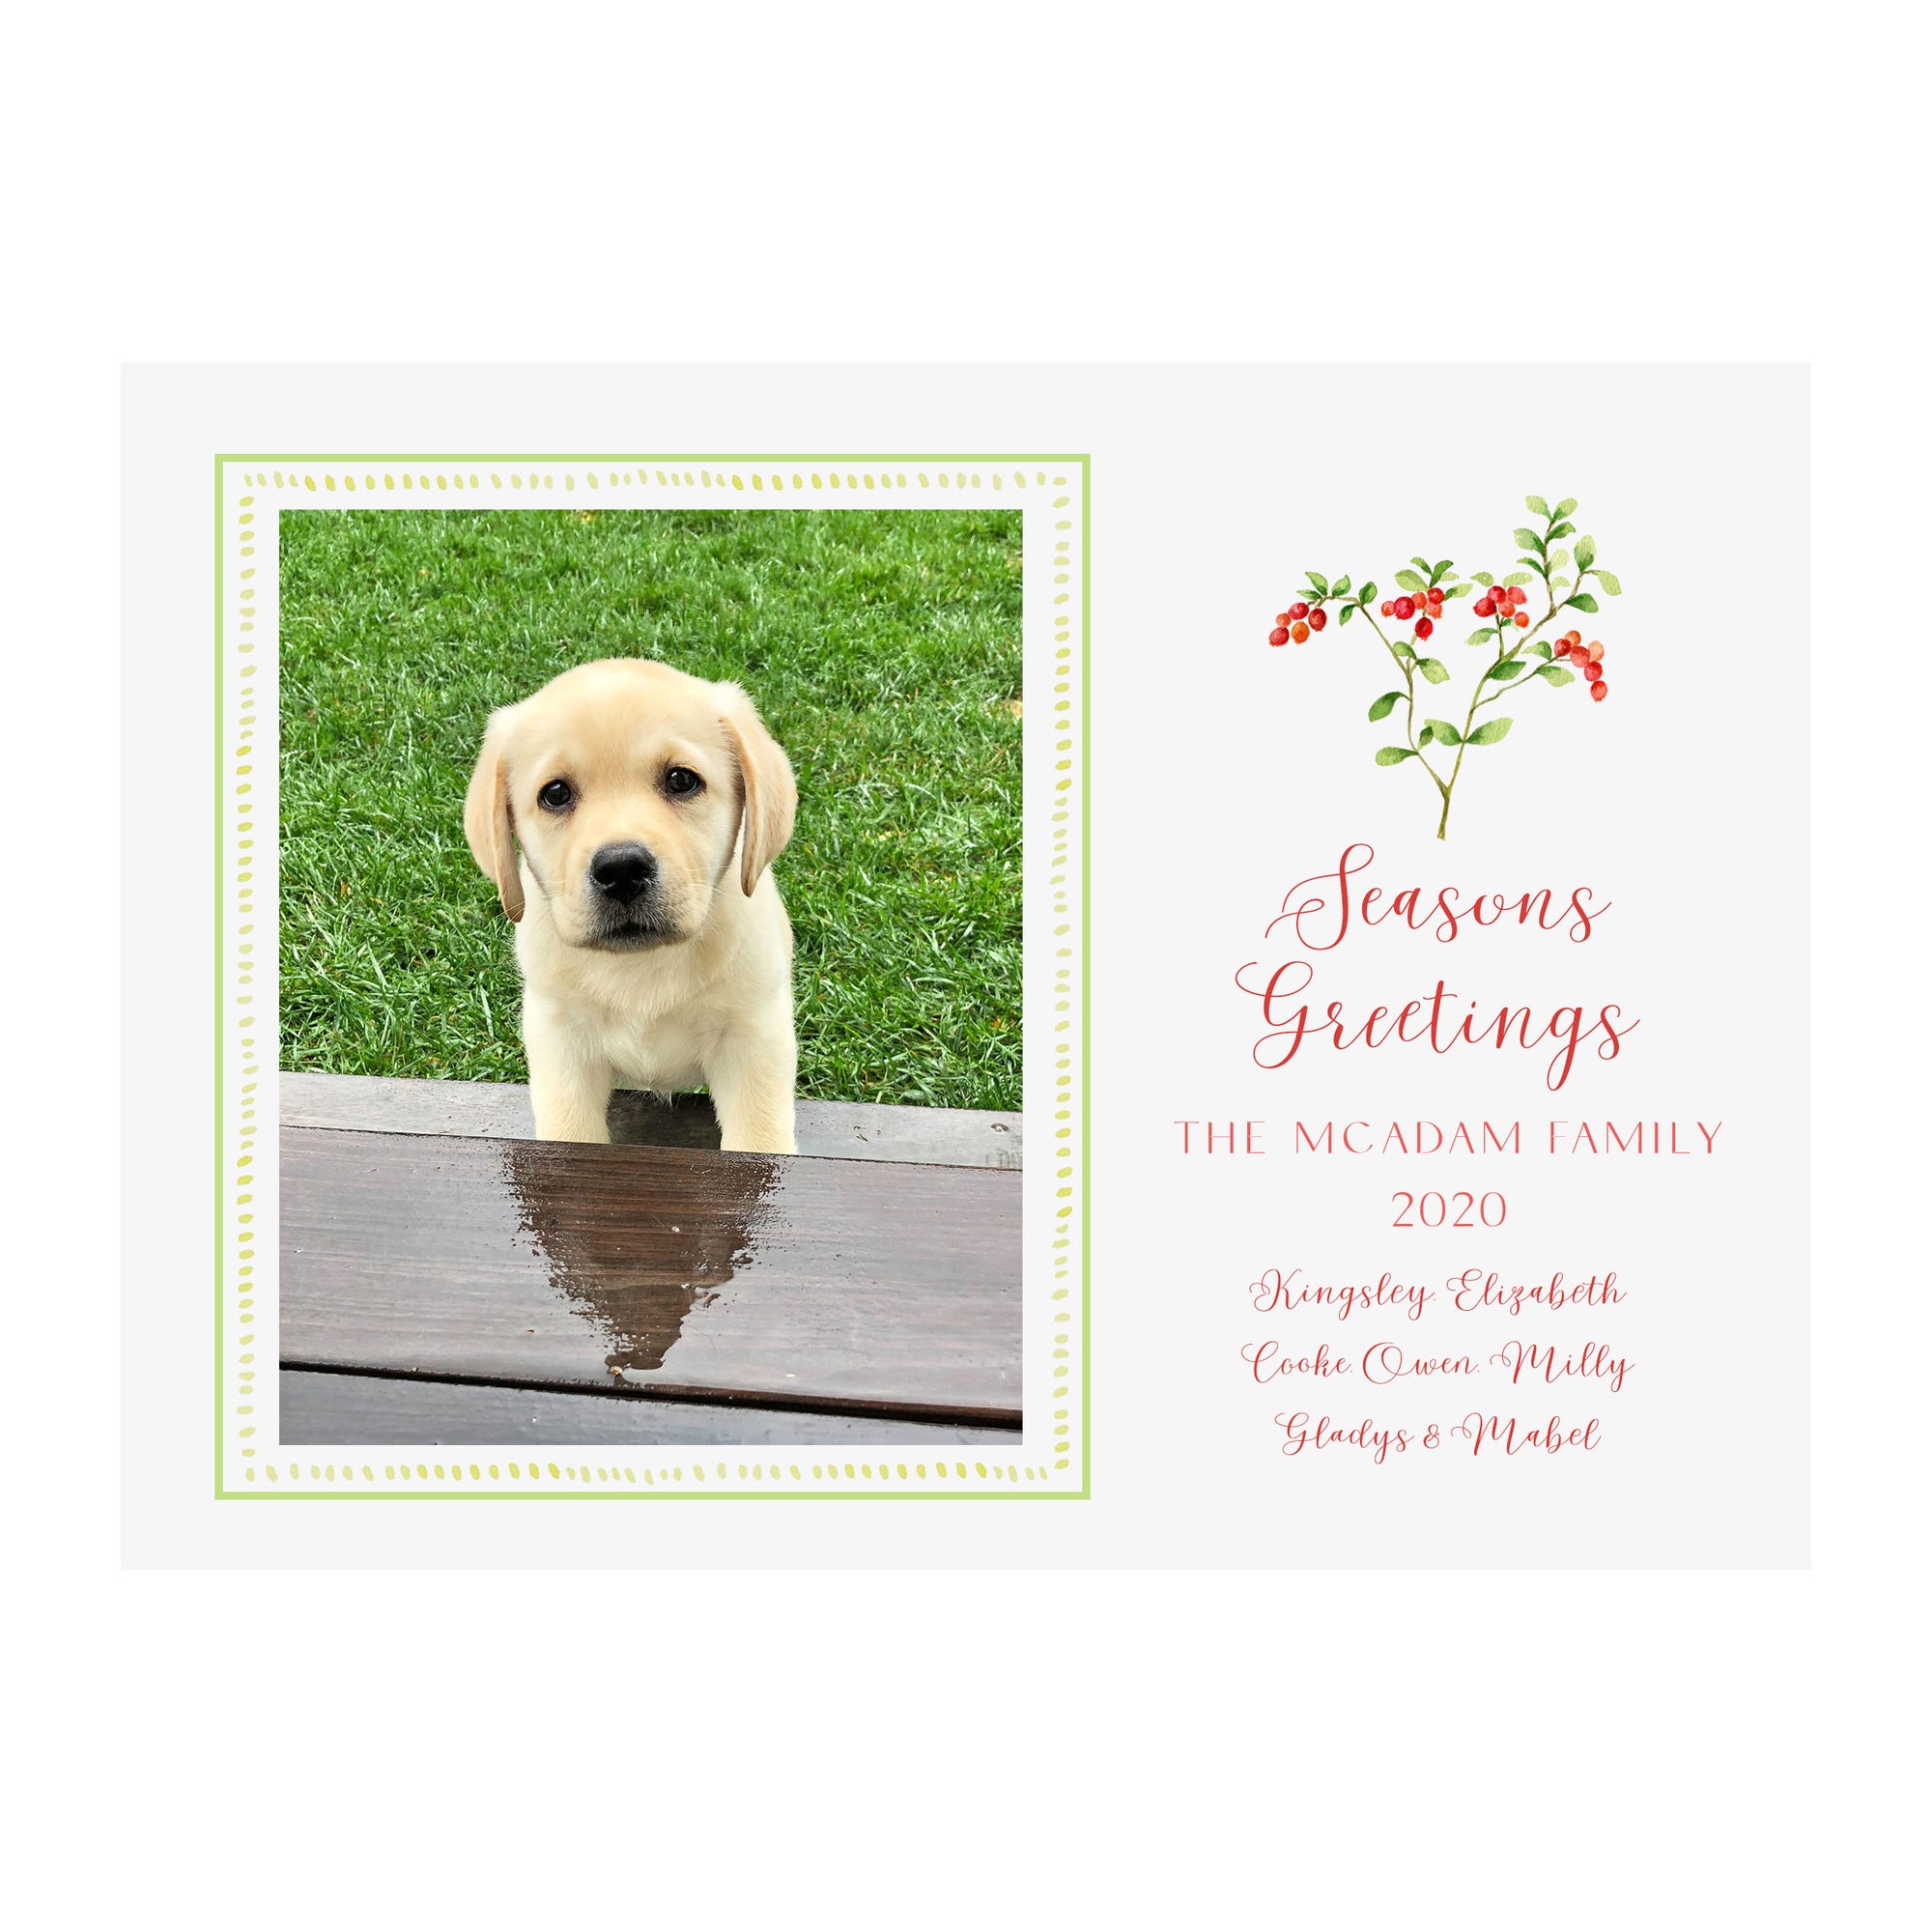 Cranberry Branch Holiday Photo Cards